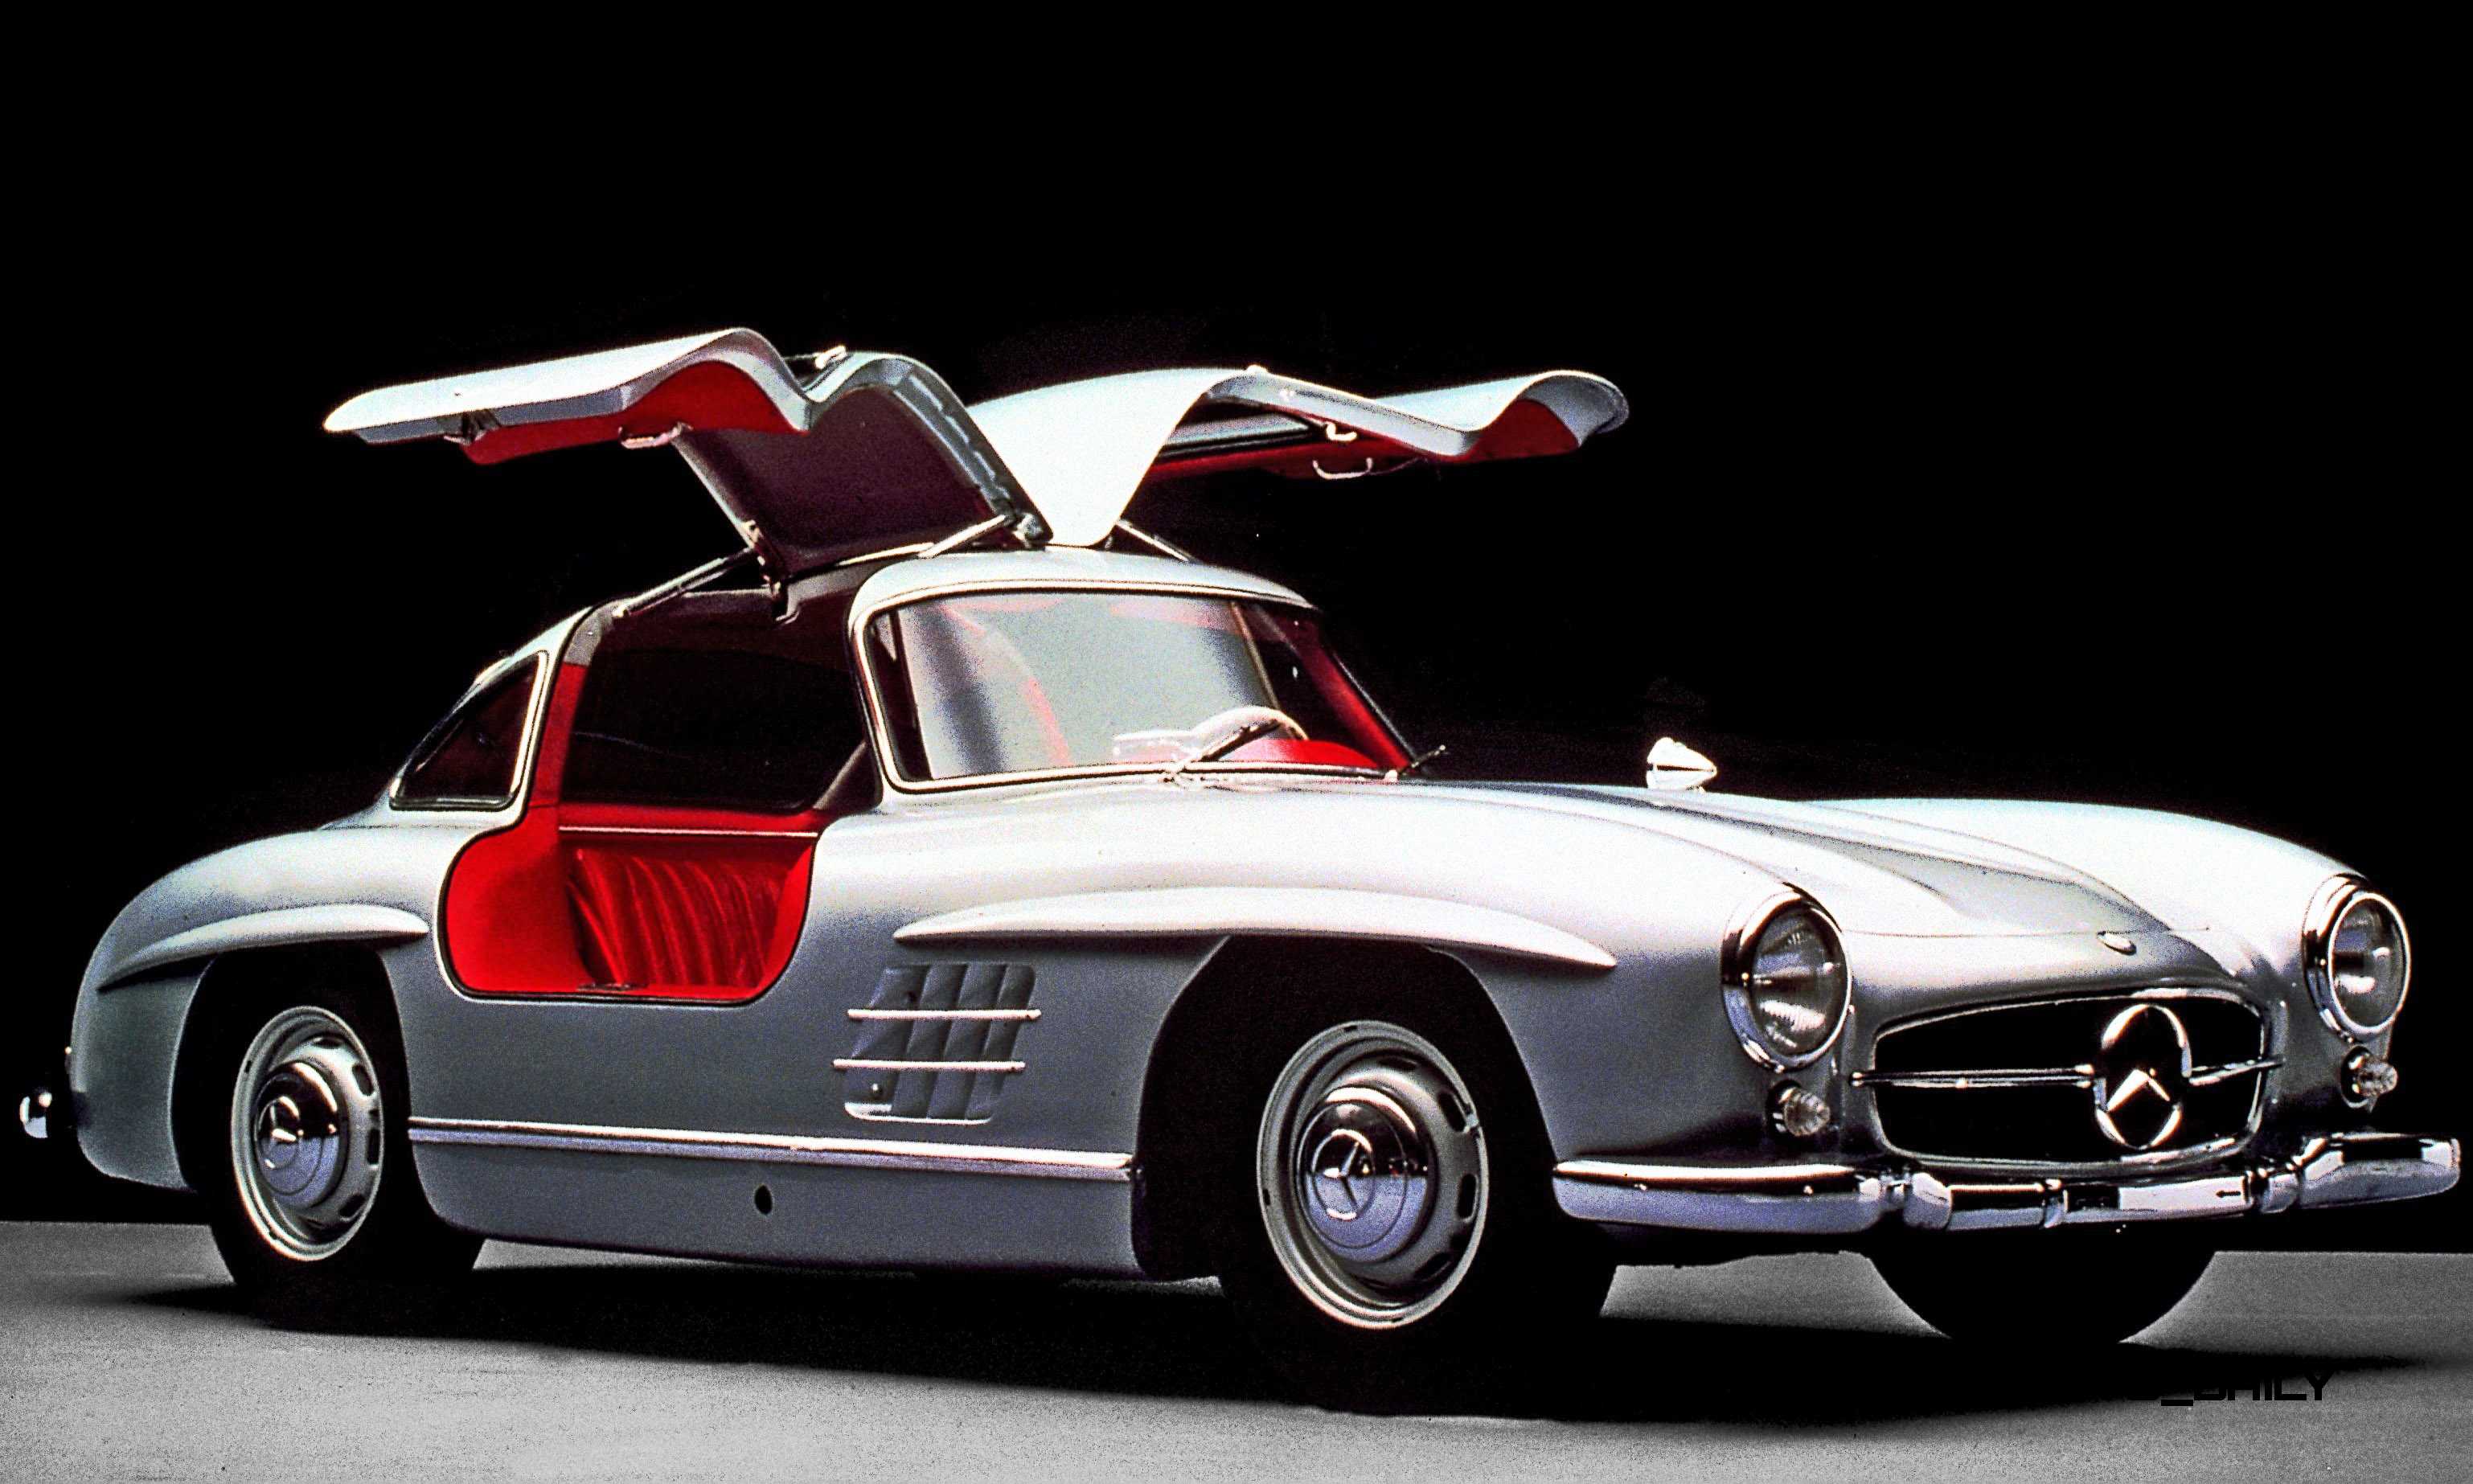 Cars With Gullwing Doors 2019 / The greatest cars ever made with gullwing doors Read Cars